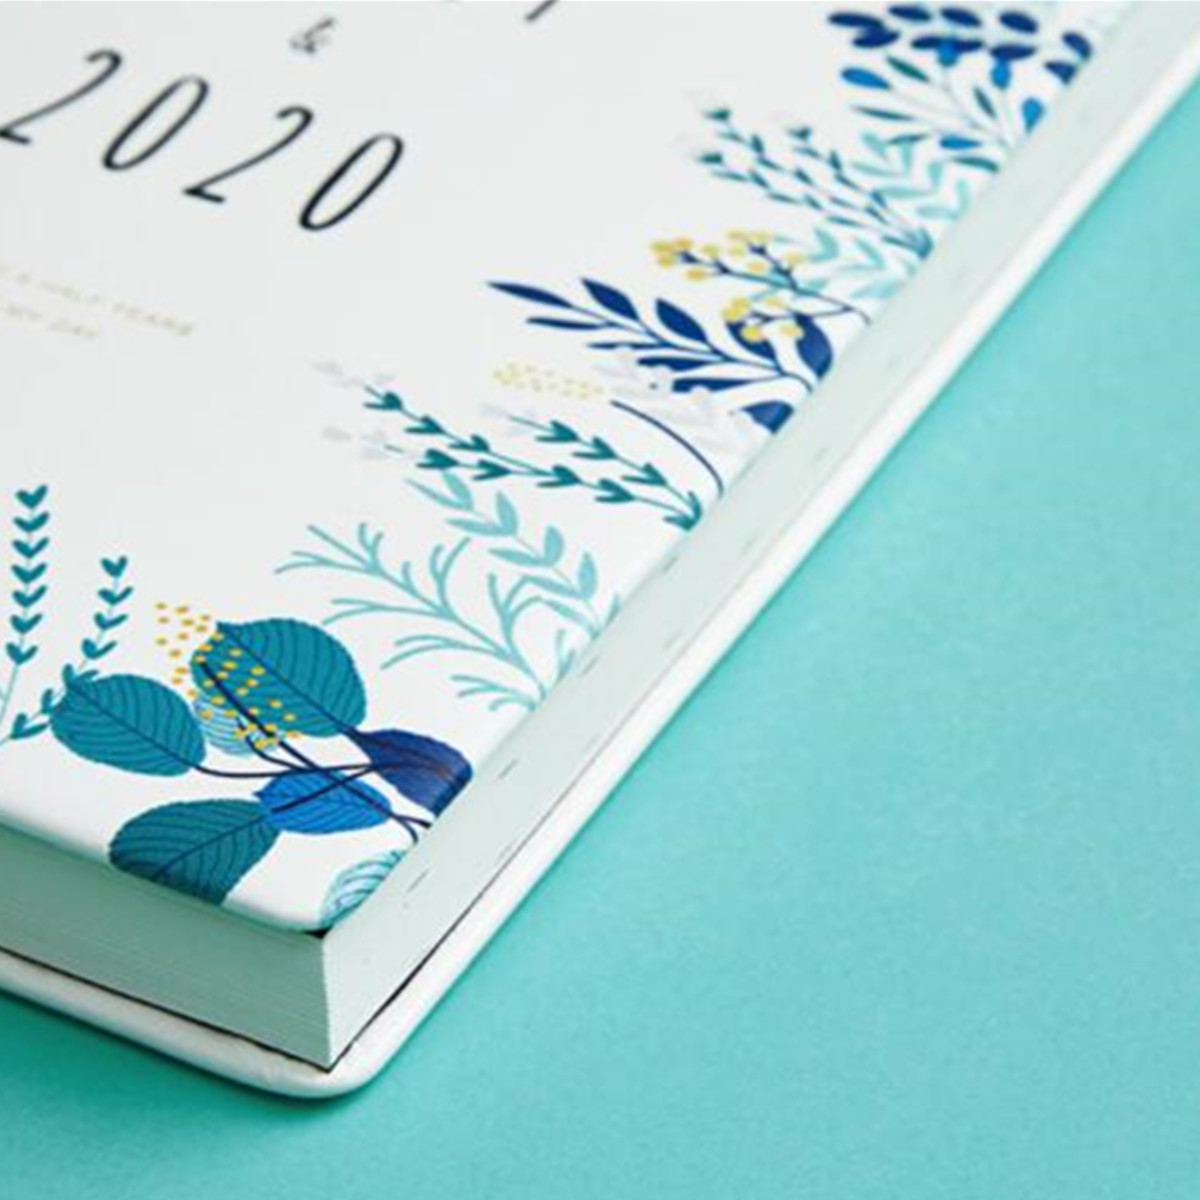 2019-2020-Weekly-Monthly-Agenda-Planner-Monthly-Weekly-Plan-Portable-Notebook-Cute-Diary-Flower-Sche-1530952-6